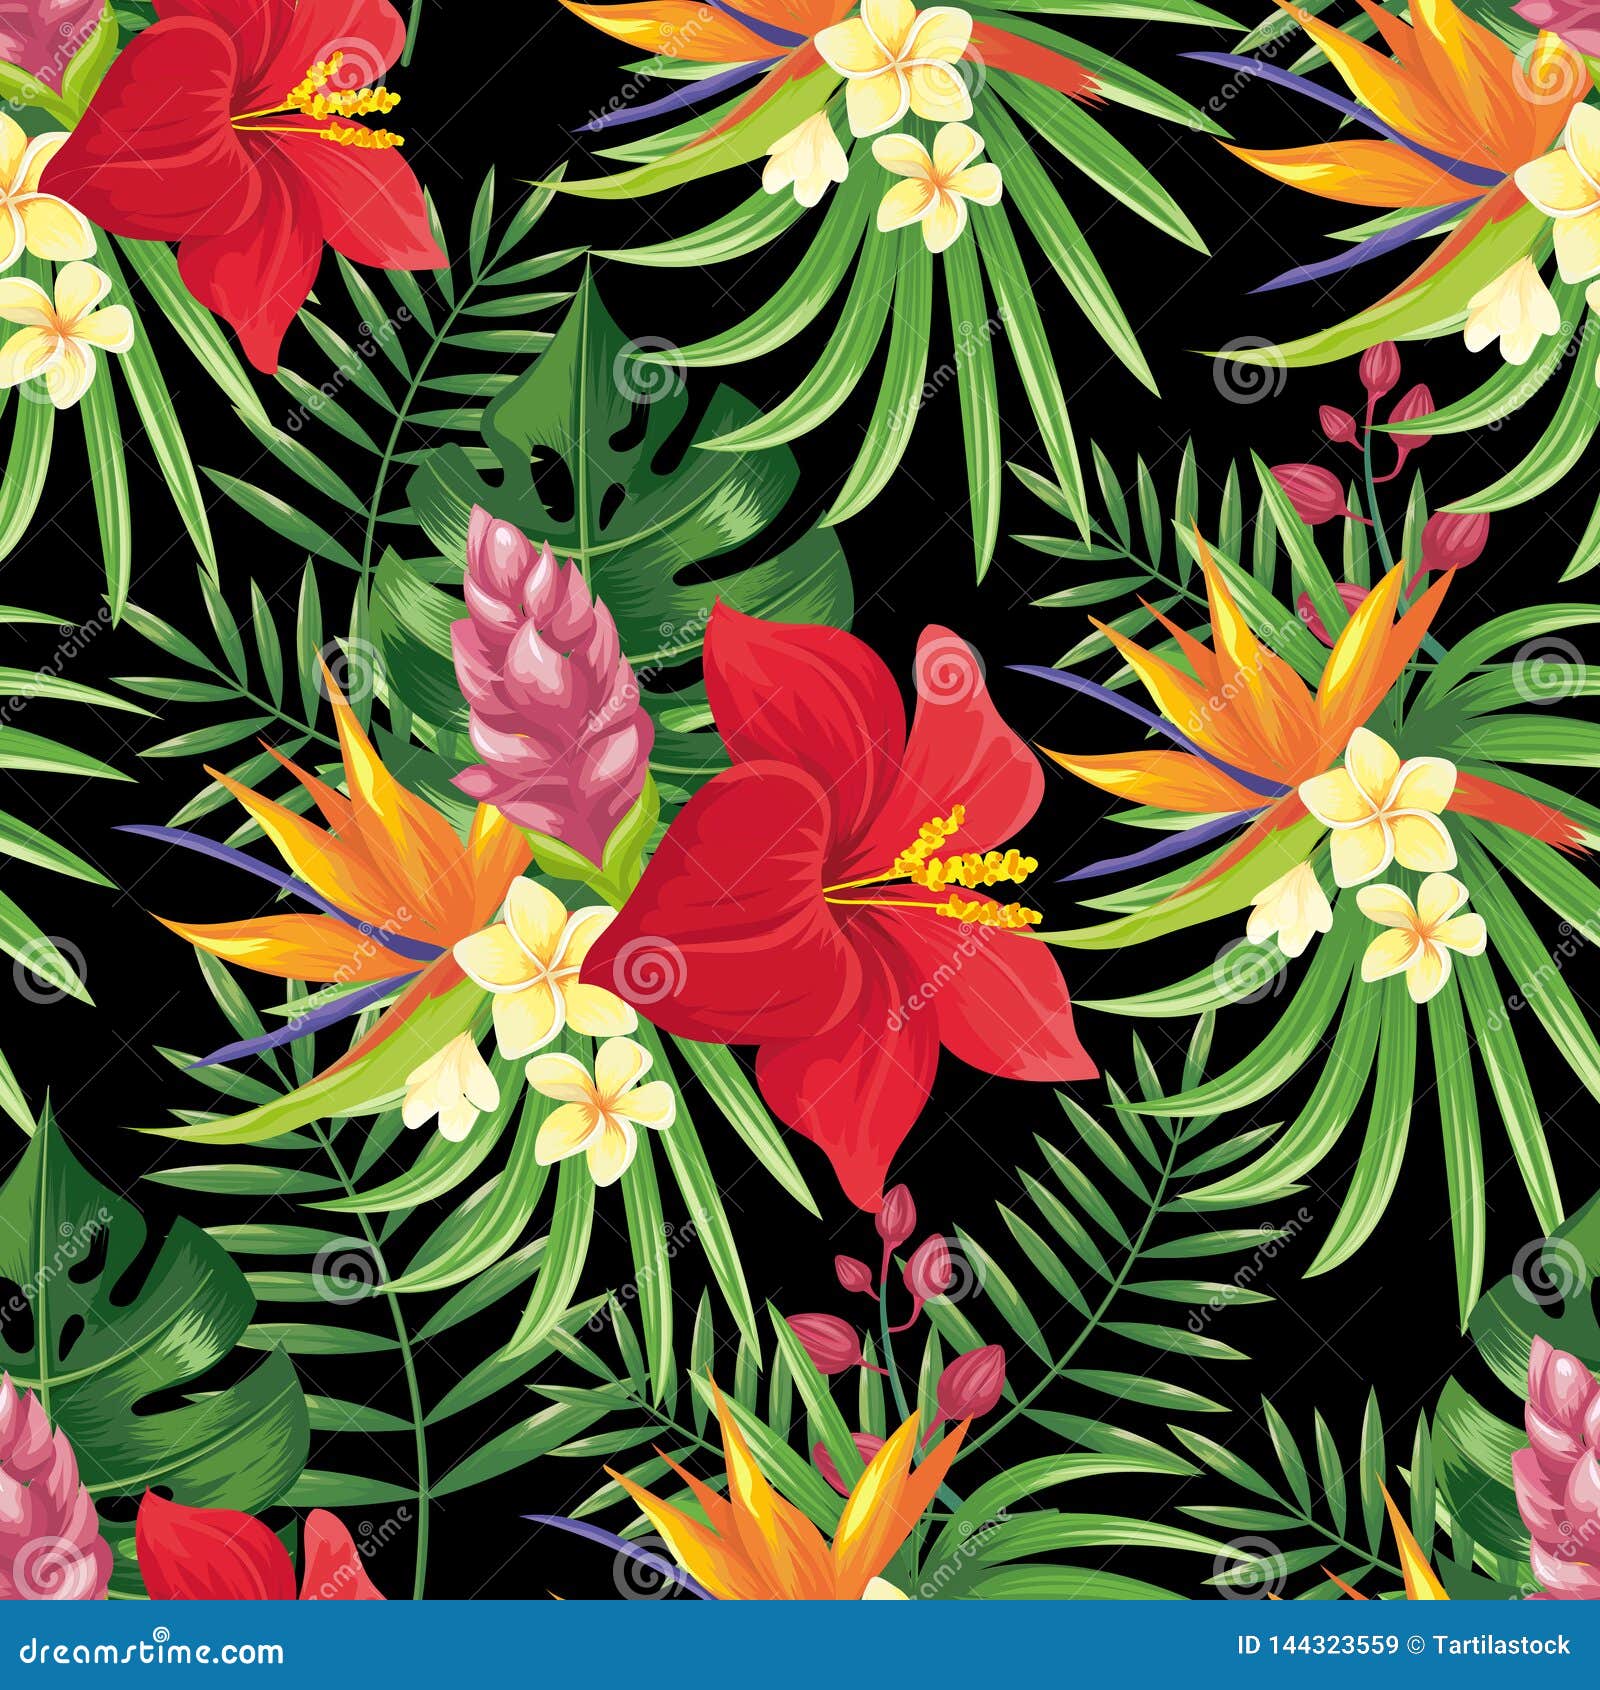 Tropical floral design for t-shirt fabric print Vector Image